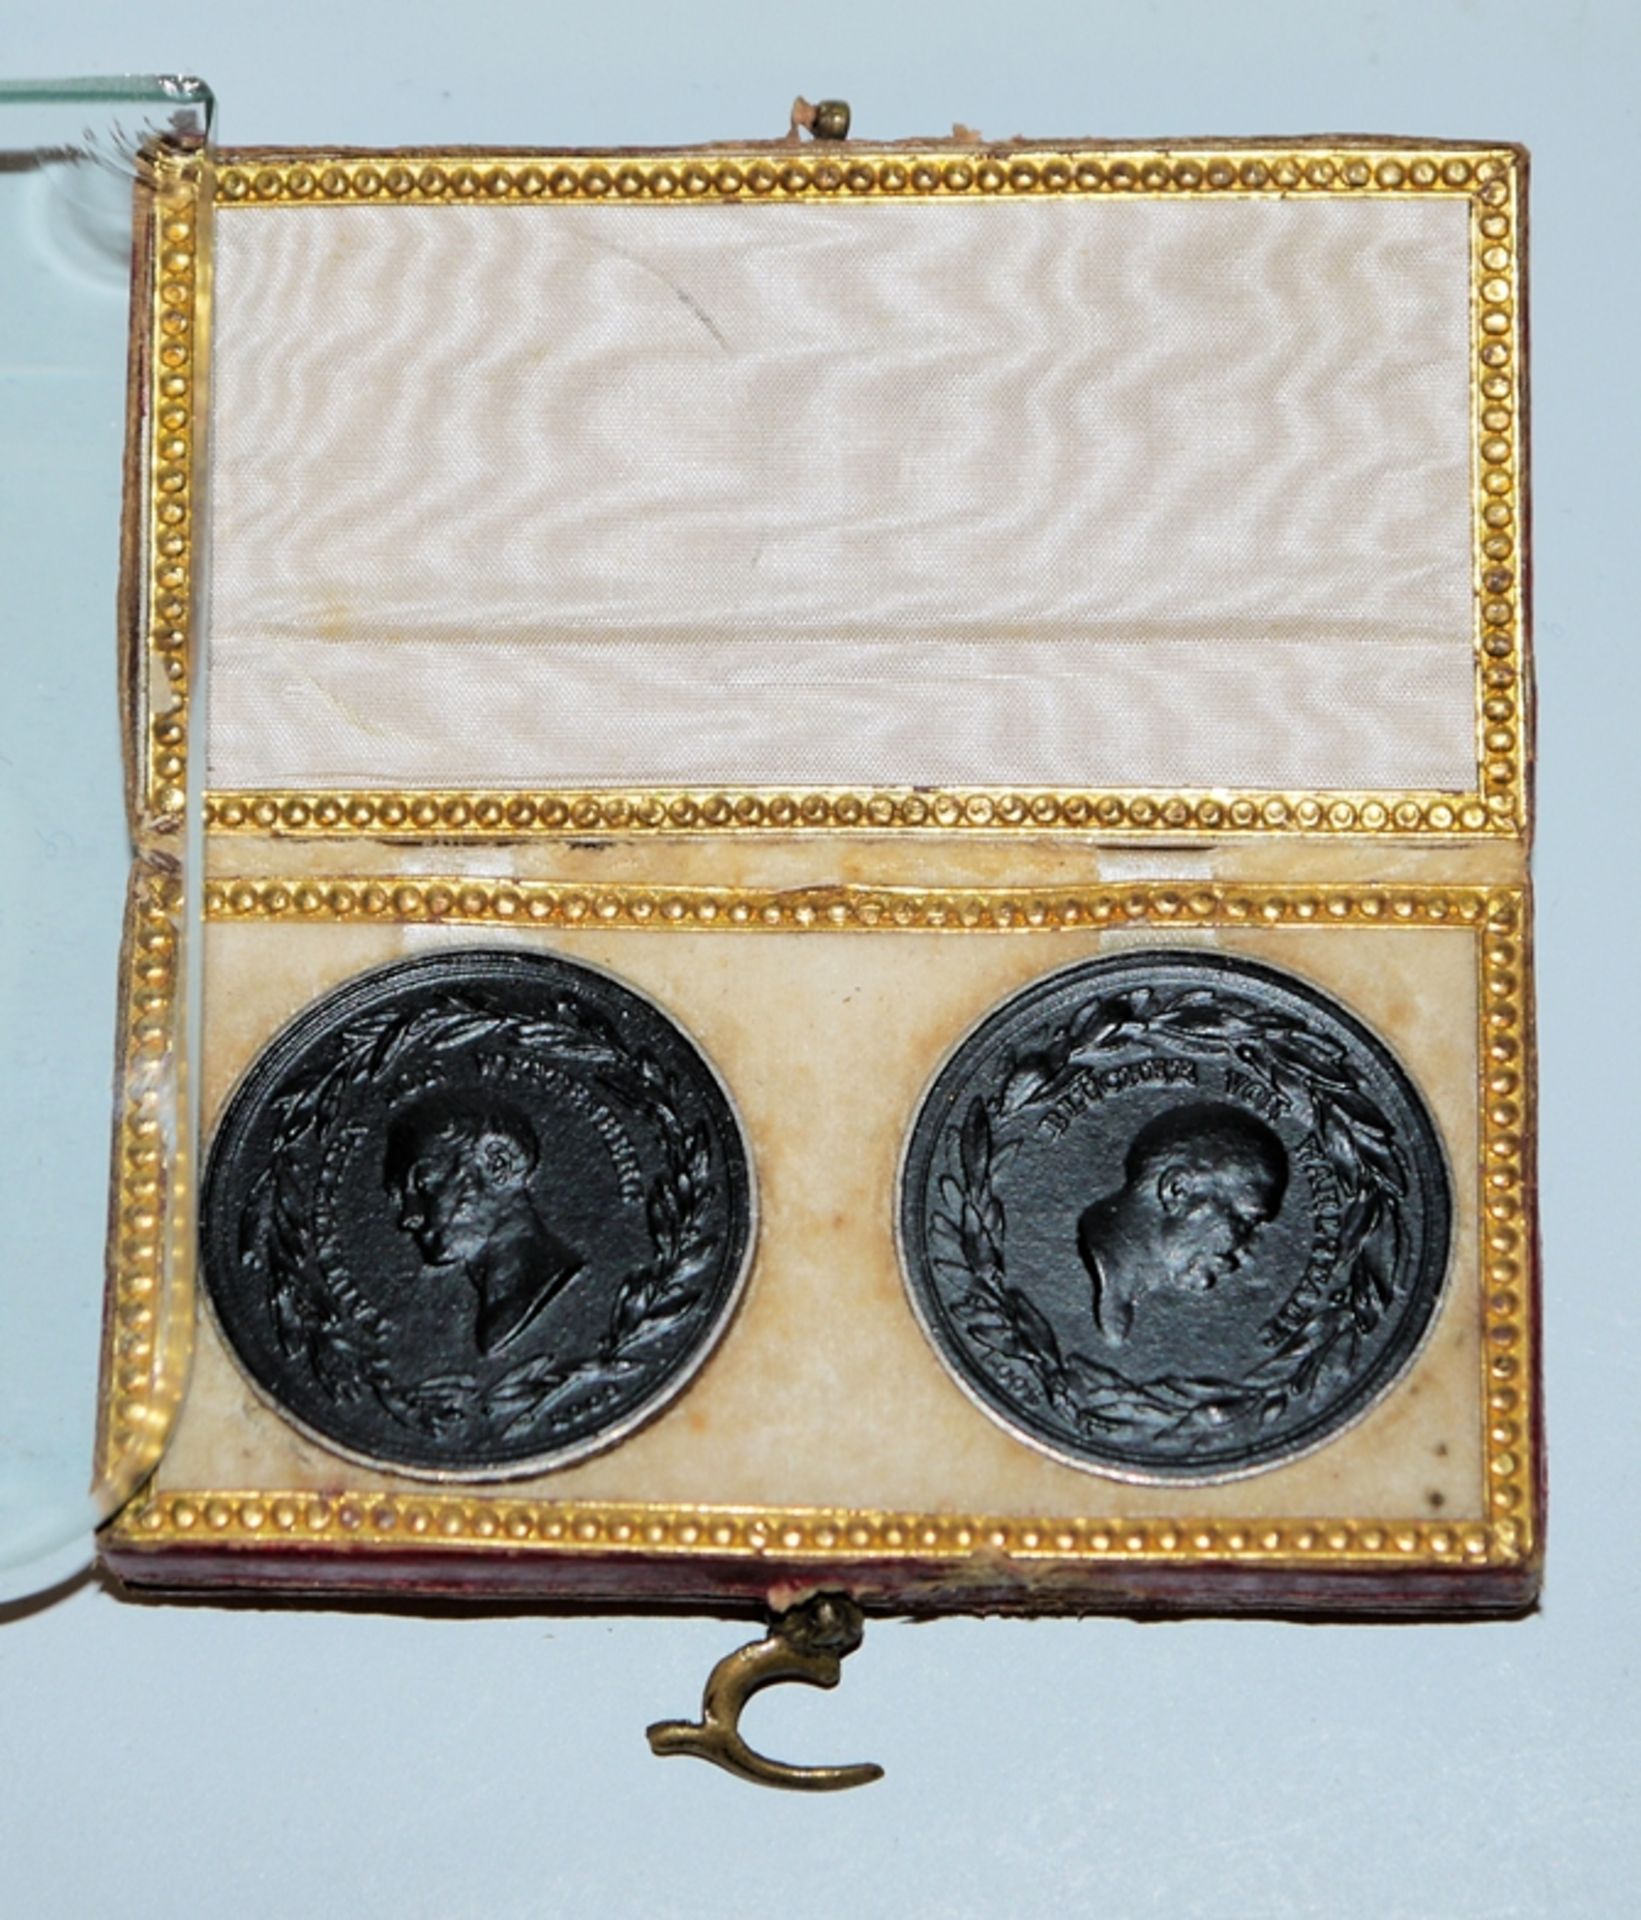 Four medals - Prussian military leaders, Berlin iron, medallist D. F. Loos, 1815, in original case - Image 2 of 3